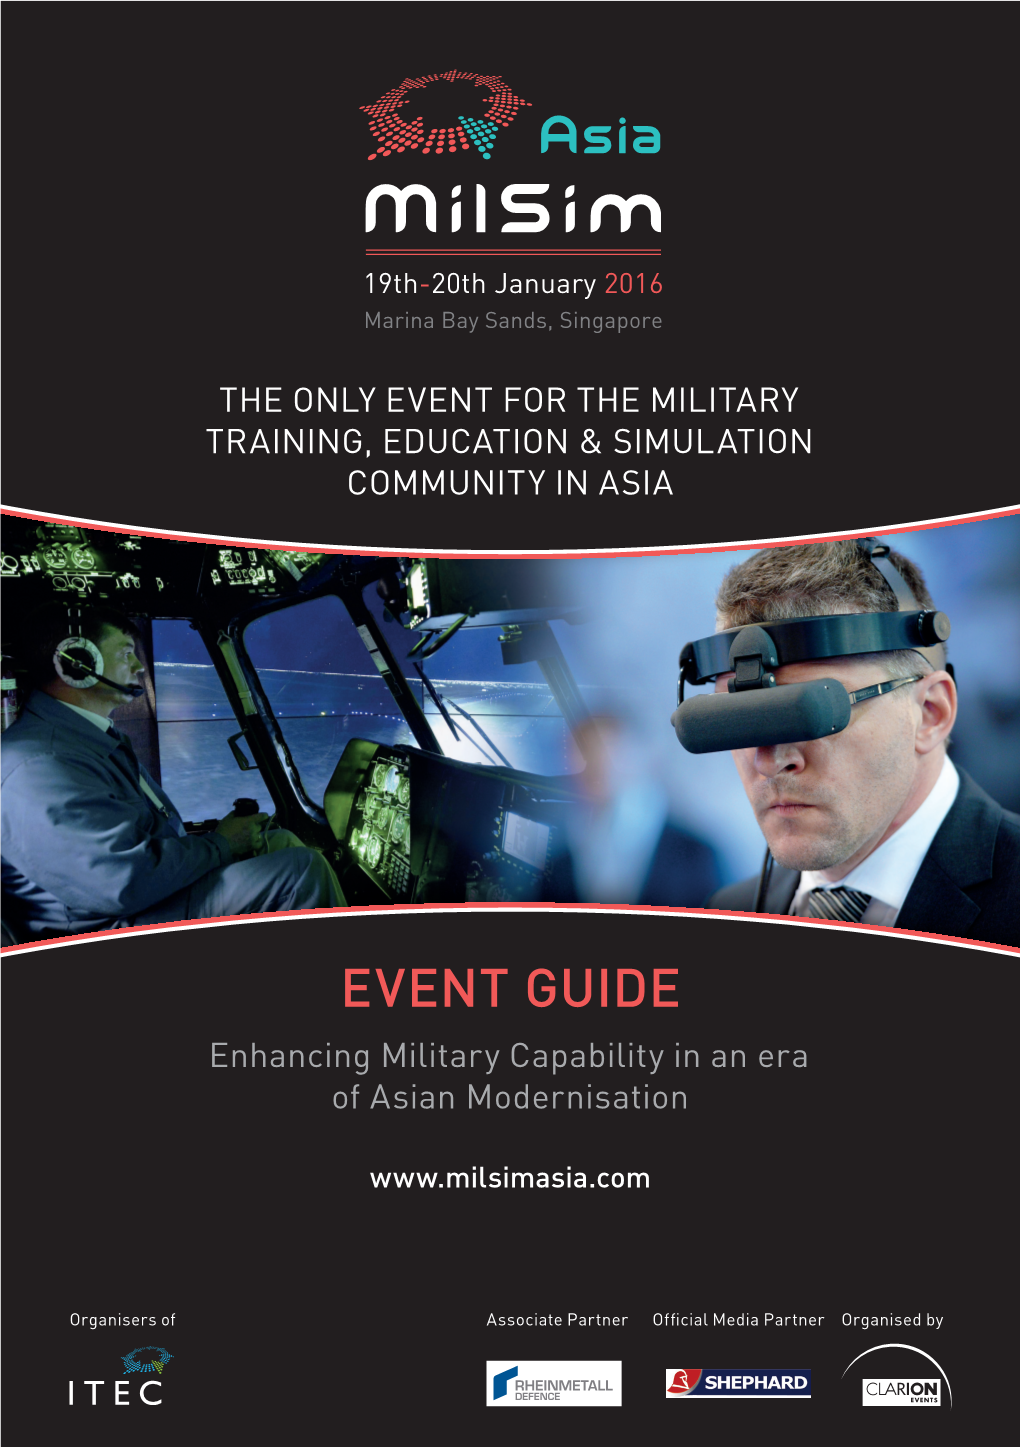 EVENT GUIDE Enhancing Military Capability in an Era of Asian Modernisation